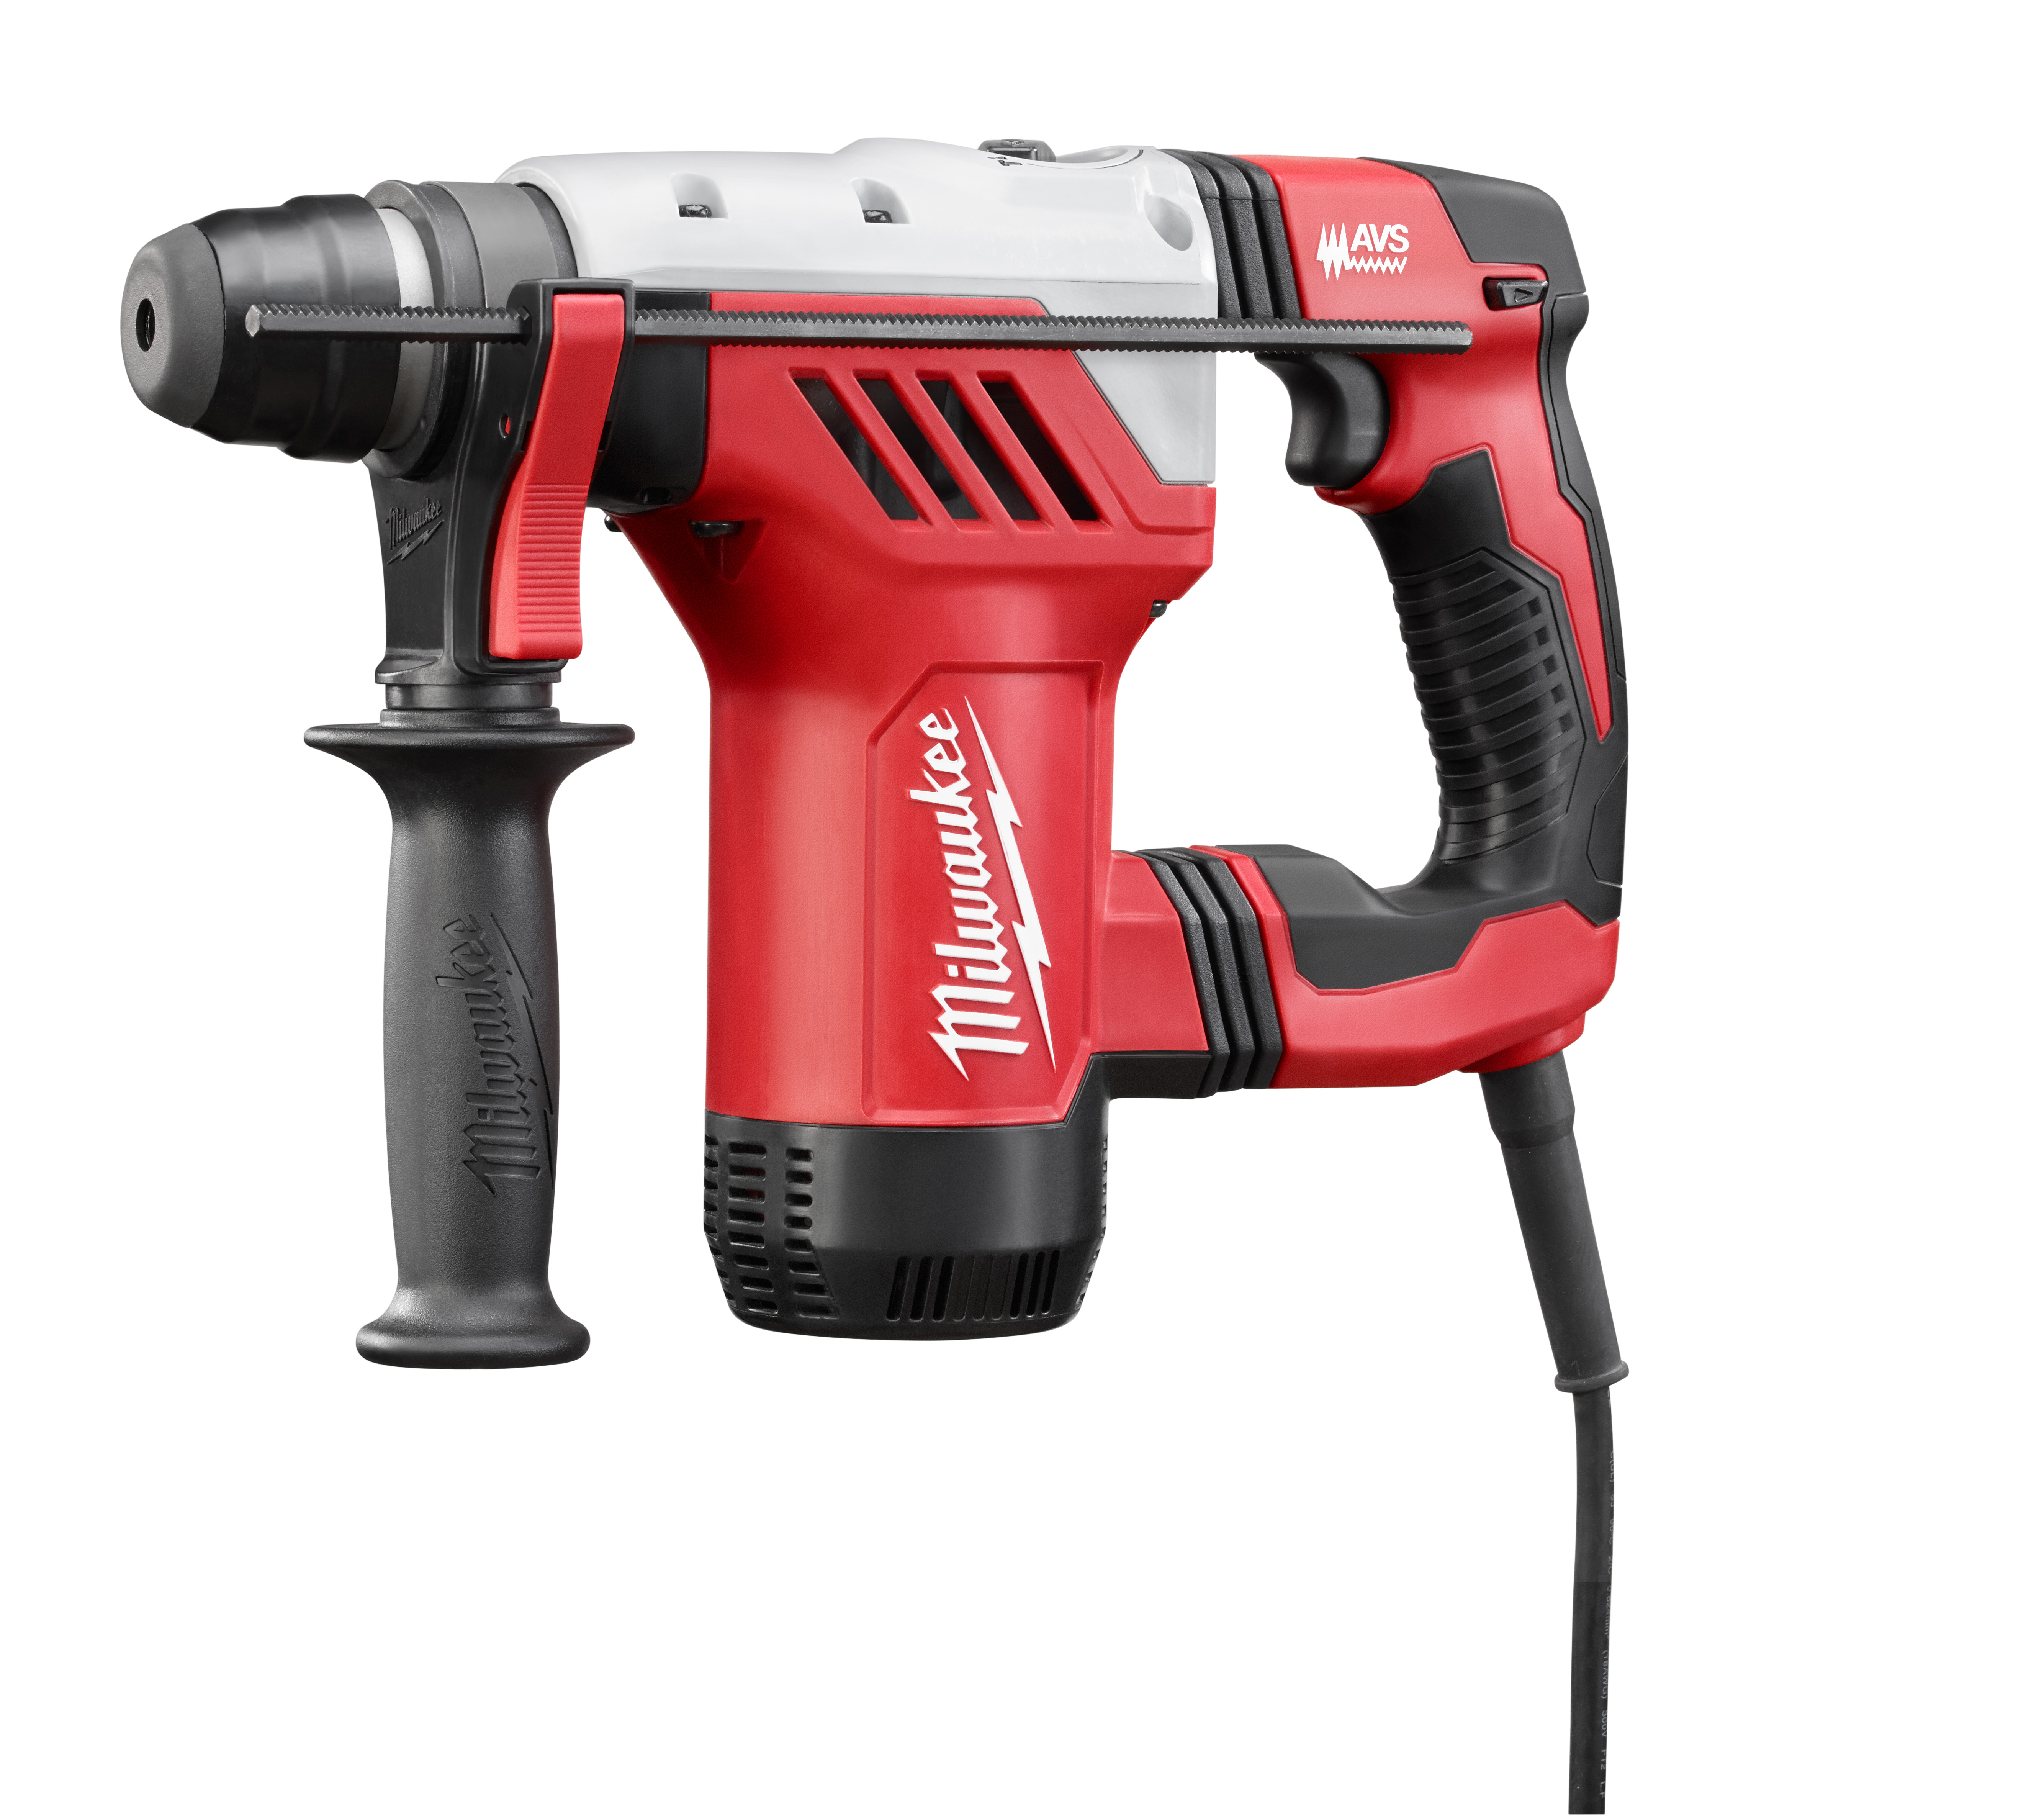 Get up to 85% faster drilling and 85% harding hitting while reducing vibration to only 10.6 m/s2. With a powerful 8 amp motor, this rotary hammer delivers 0-1, 500 RPM, 0-5,500 bpm and 3.6 ft-lbs of impact energy. This tool also has an all metal gear case and mechanical clutch to provide maximum durability. At only 12-1/2 in. inches long and 7-1/2 lbs, this tool makes for a very powerful and lightweight 1-1/8 in. 3-mode rotary hammer. The kit includes a side handle, depth rod and carrying case.